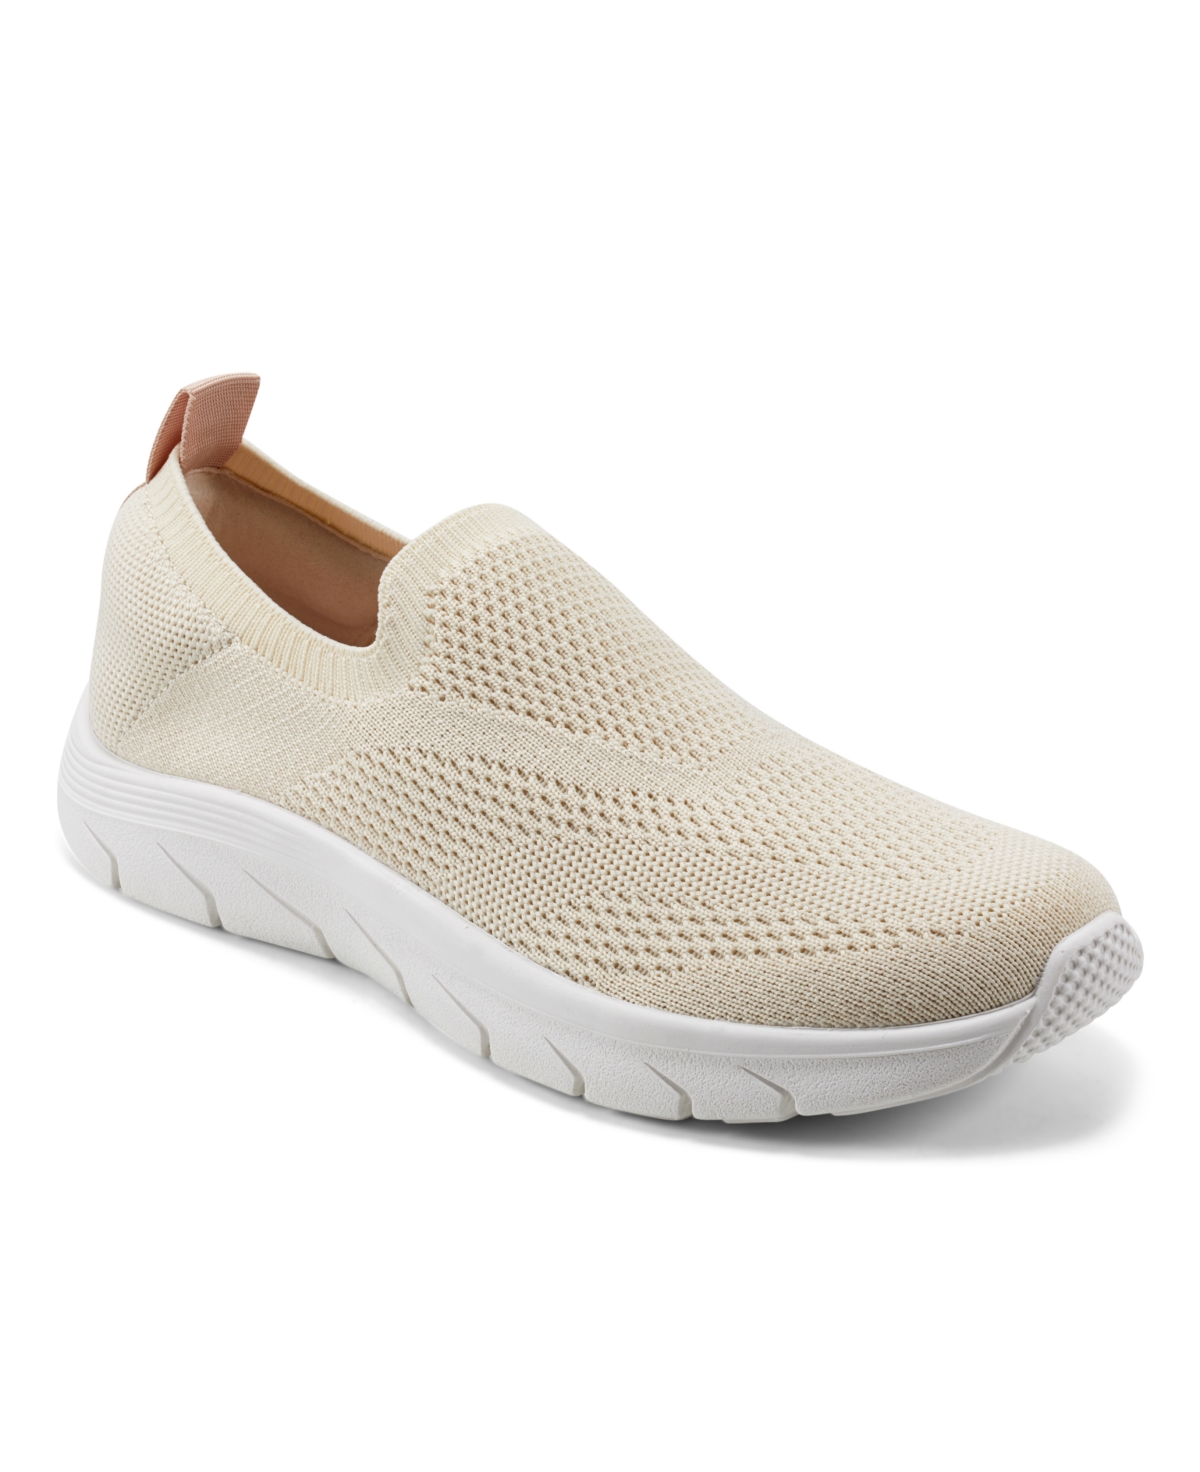 Women's Valli Round Toe Slip-On Casual Sneakers - Light Natural